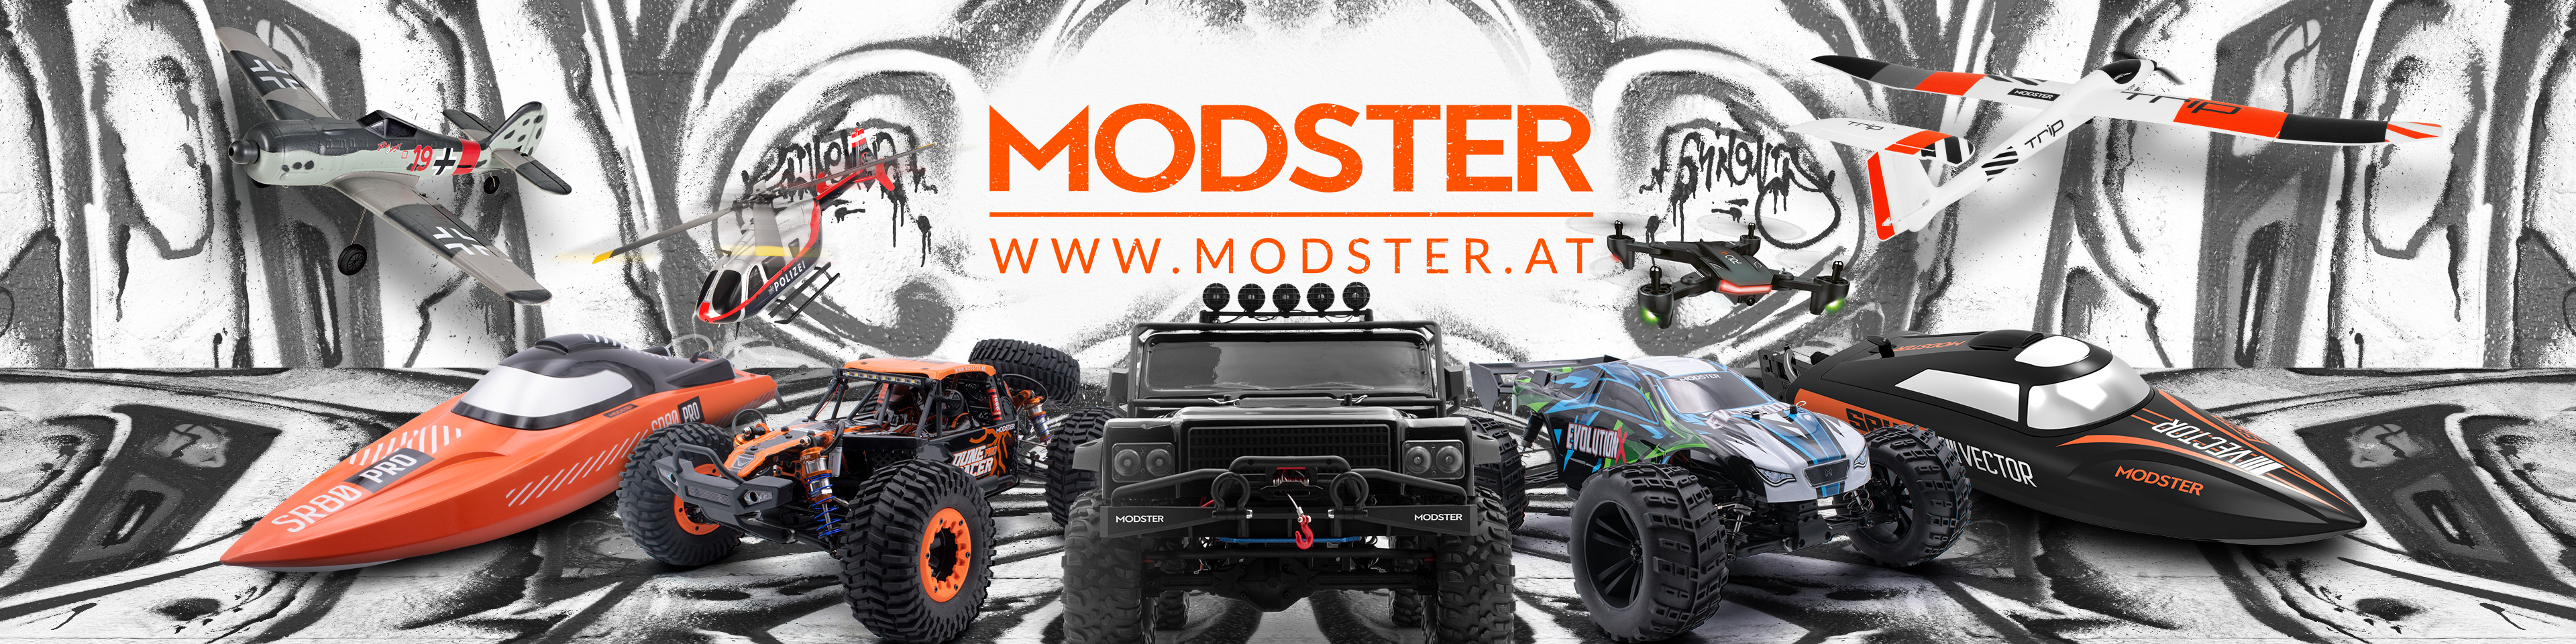 Modster-RC-More-than-just-a-Hobby-2023-Desktop